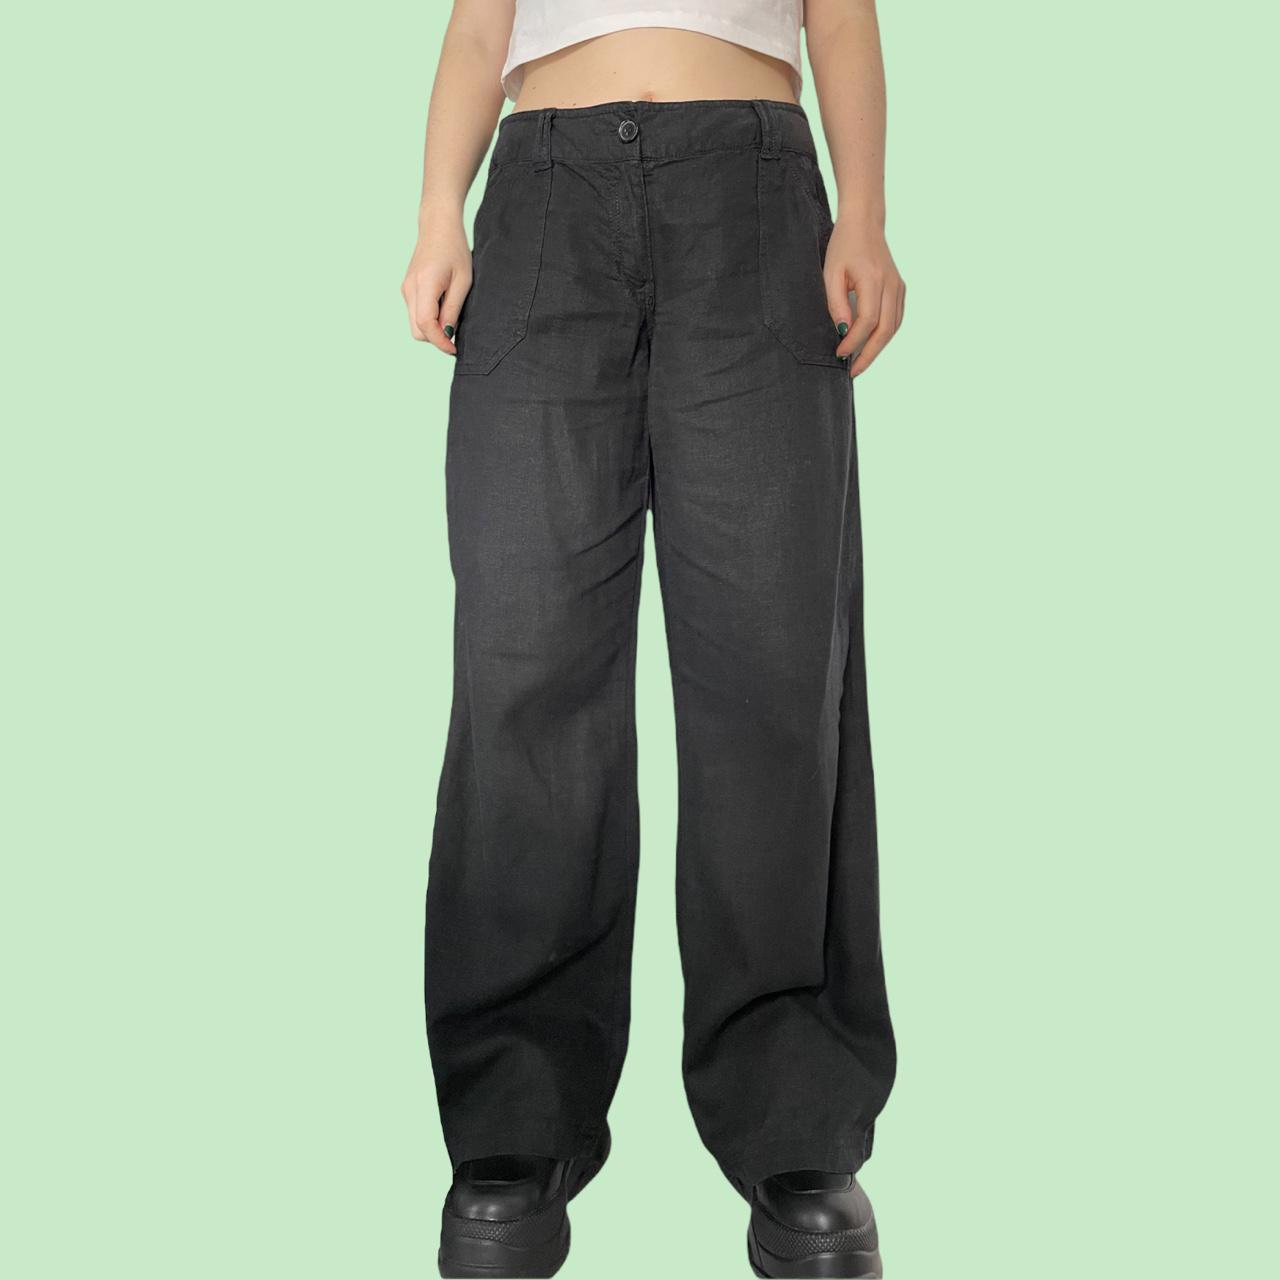 Product Image 1 - Petite black cargo pants

In excellent